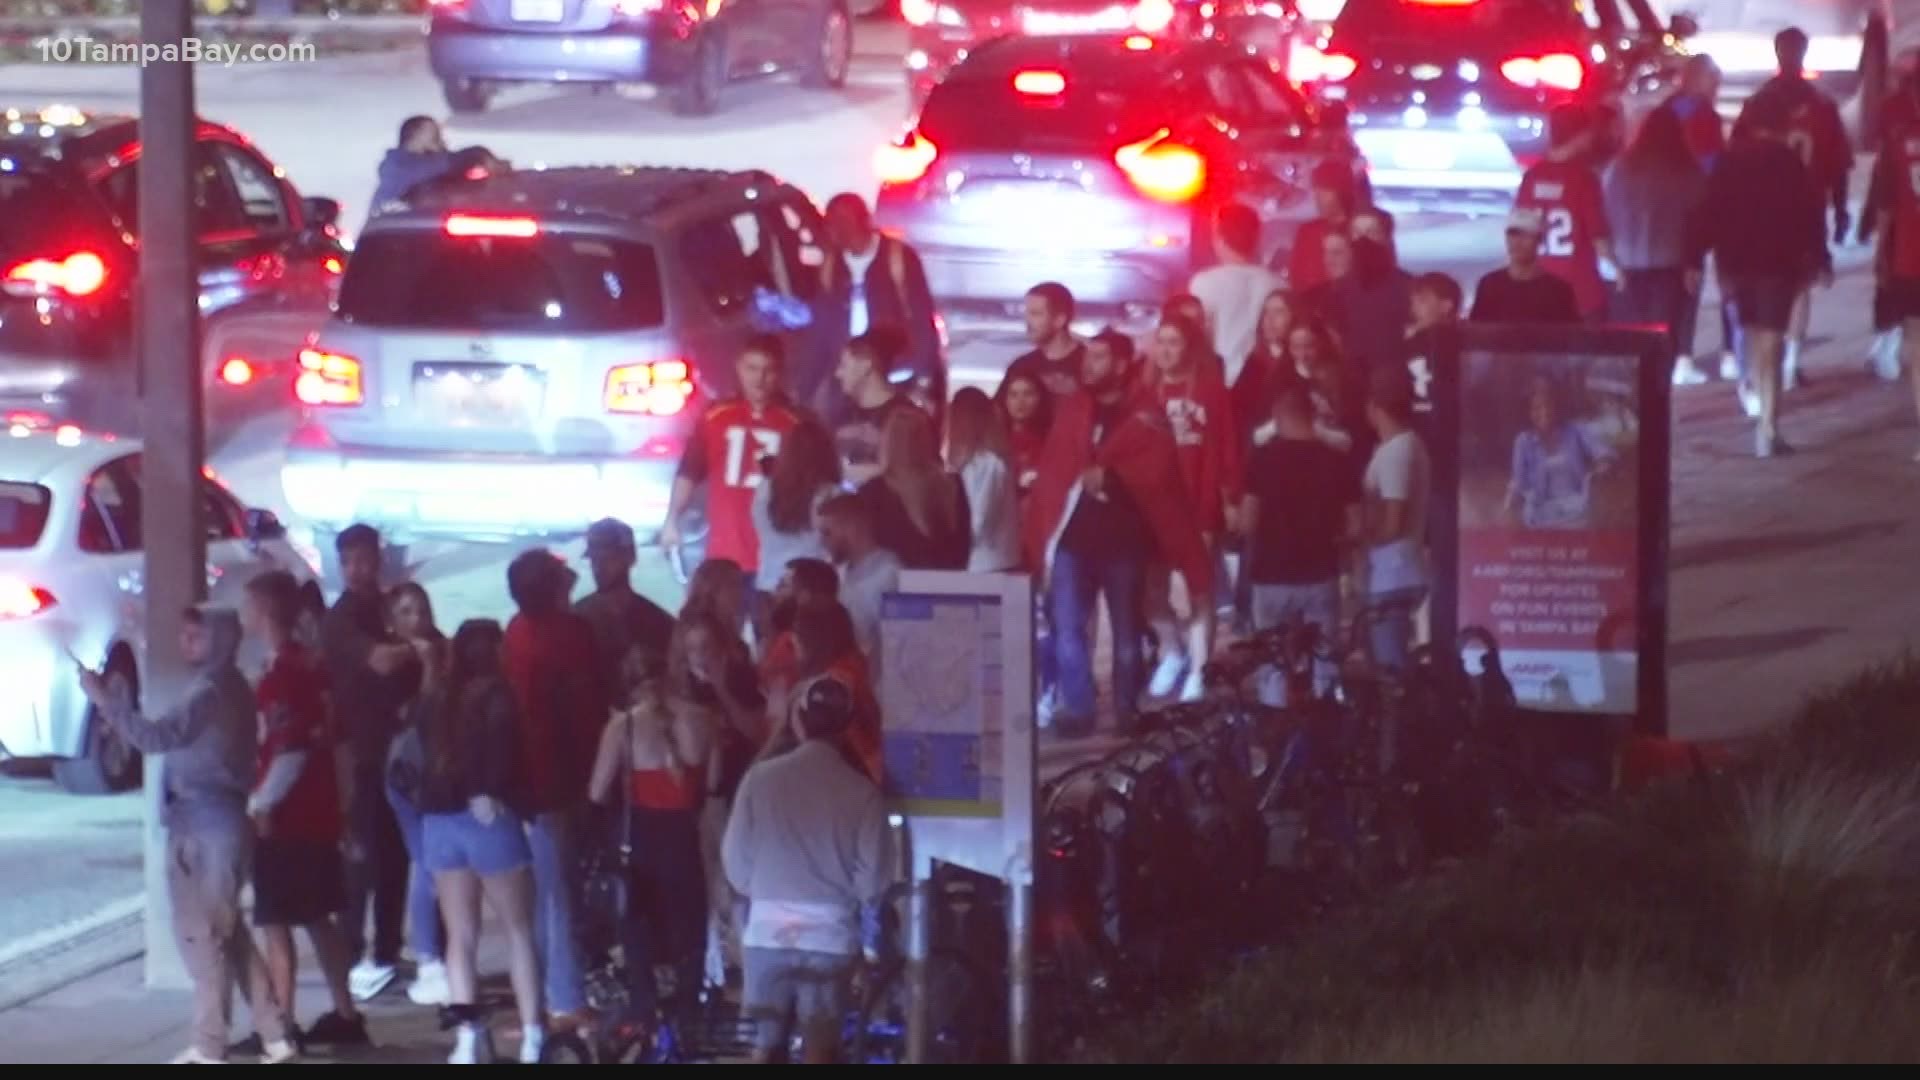 Spontaneous celebrations broke out all over Tampa Bay after the Bucs beat the Chiefs 31-9 in Super Bowl LV.